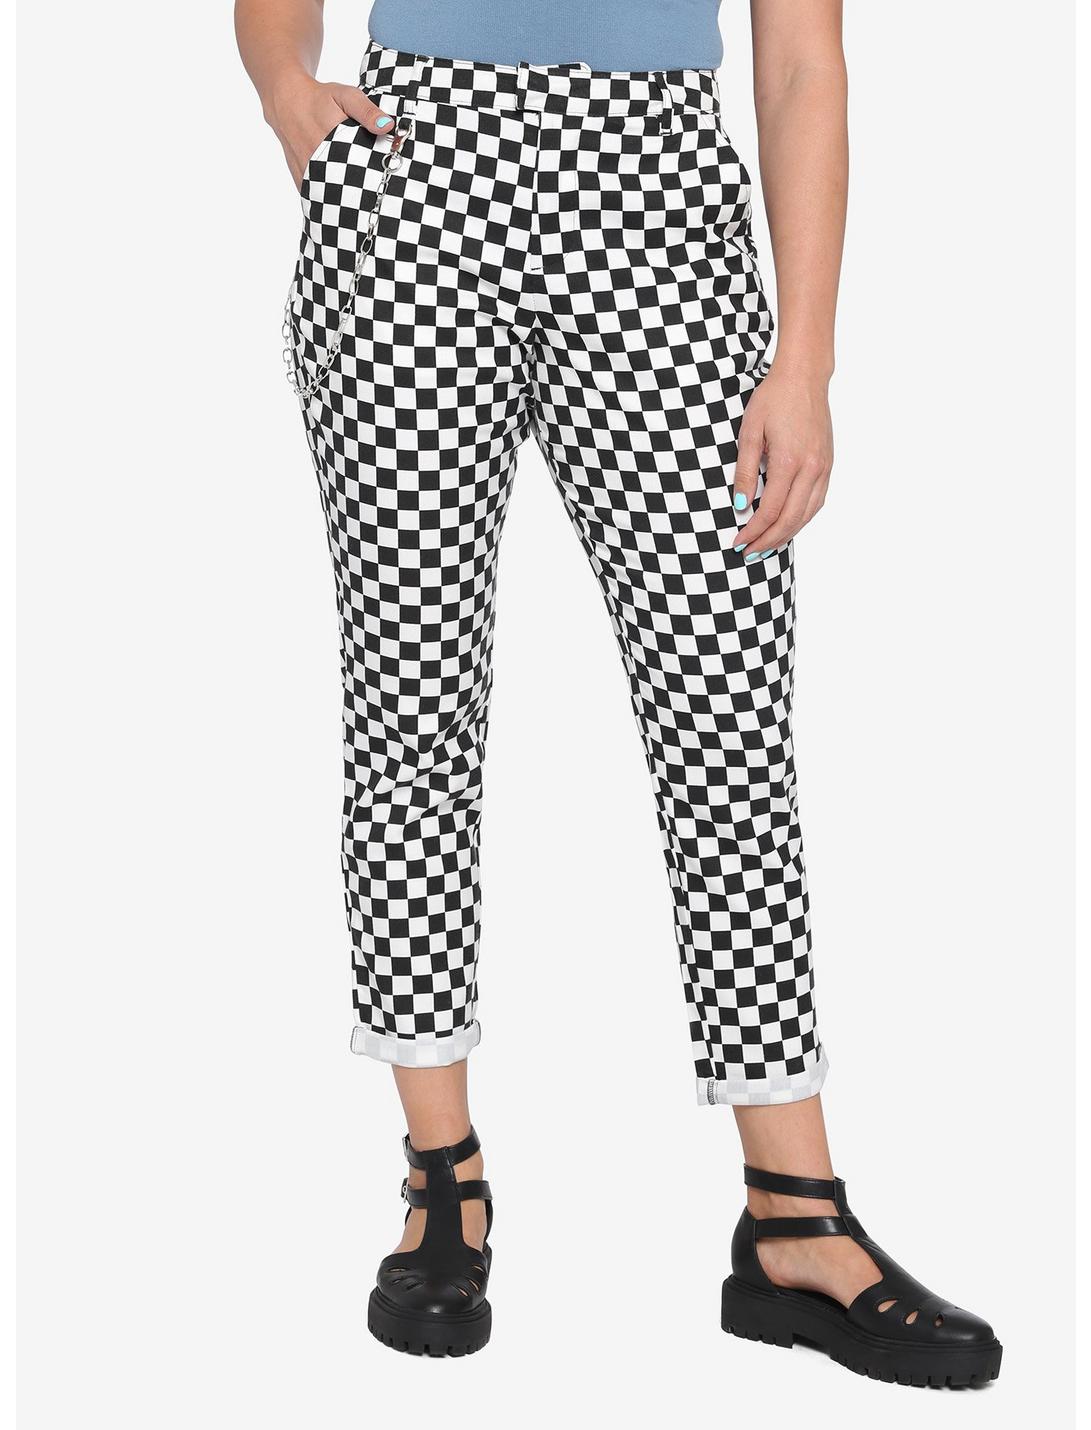 Black & White Checkered Pants With Detachable Chain | Hot Topic